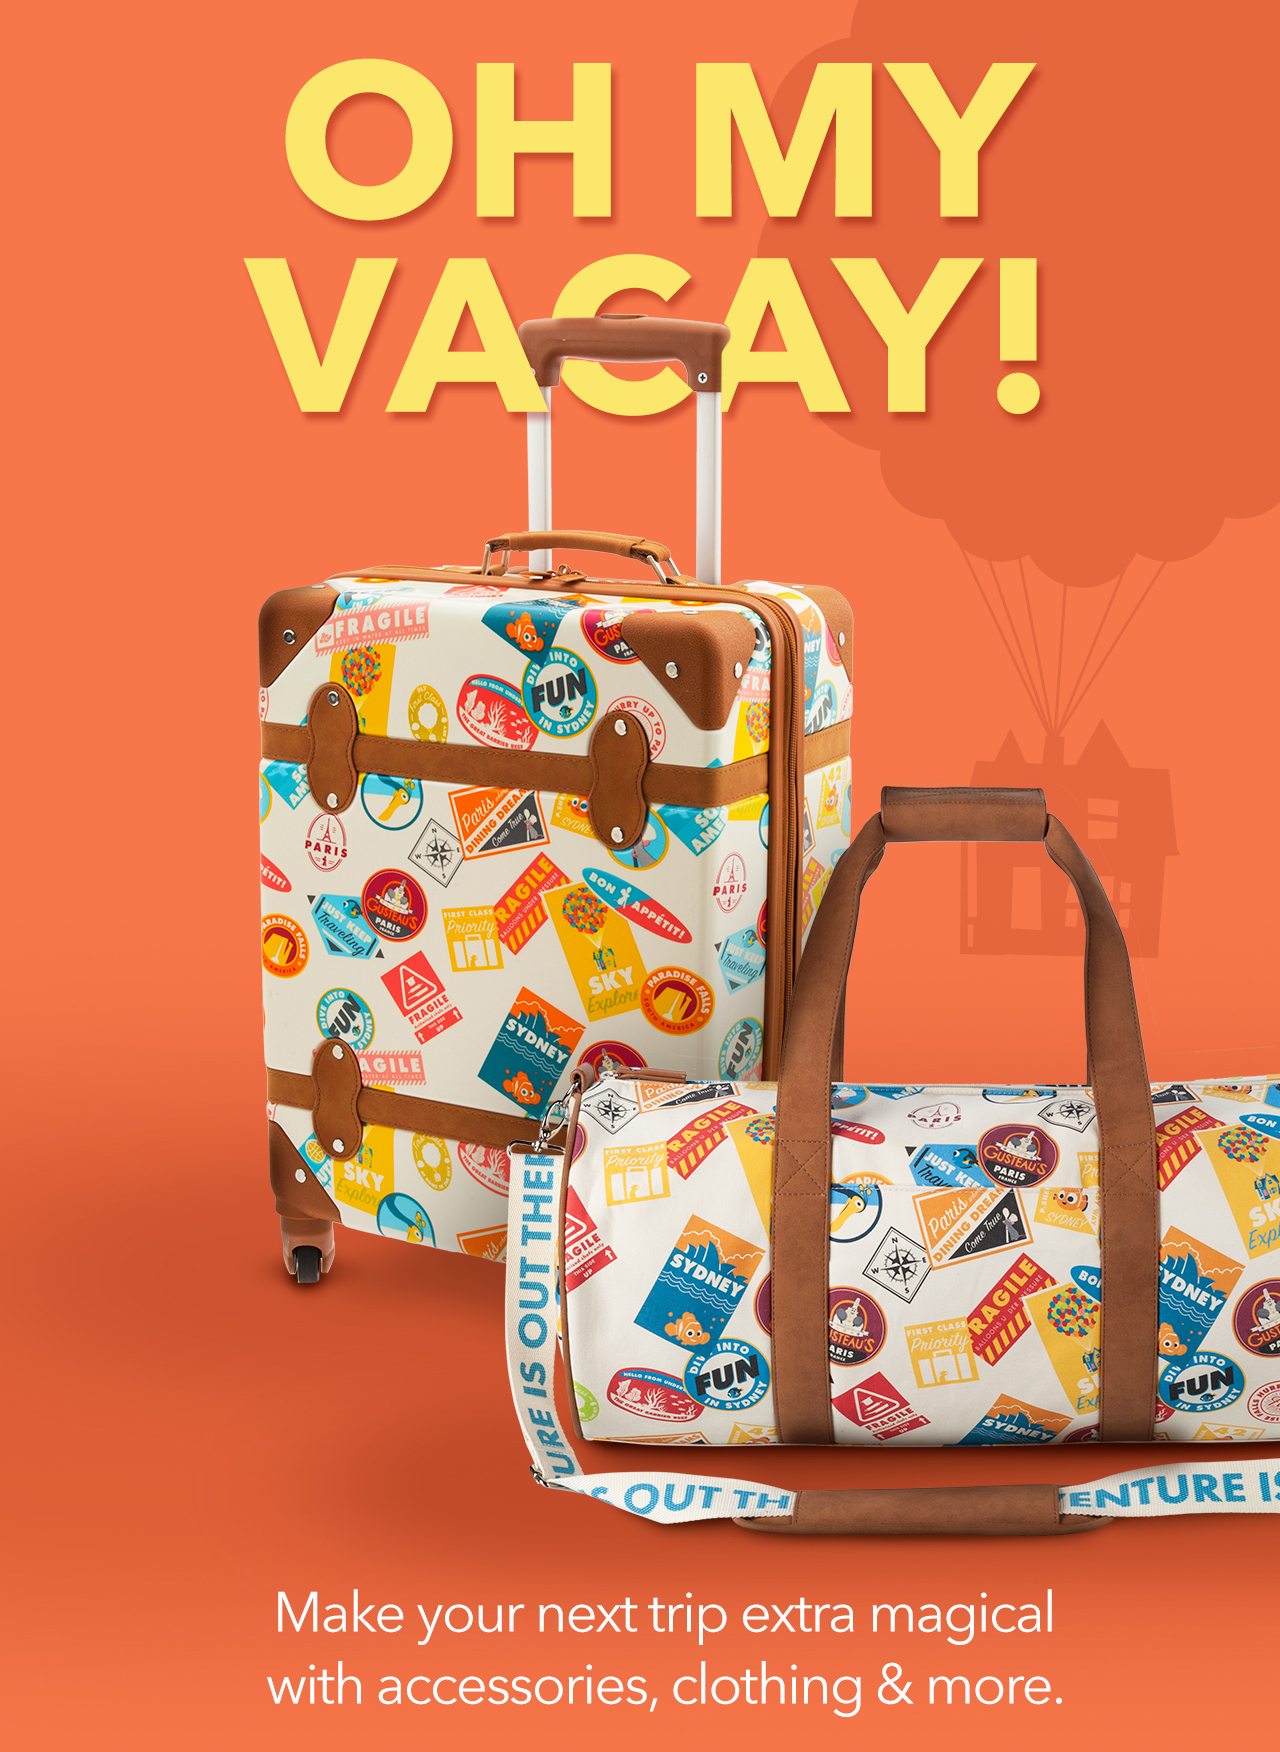 Oh My Vacay! | Make your next trip extra magical with accessories, clothing & more.